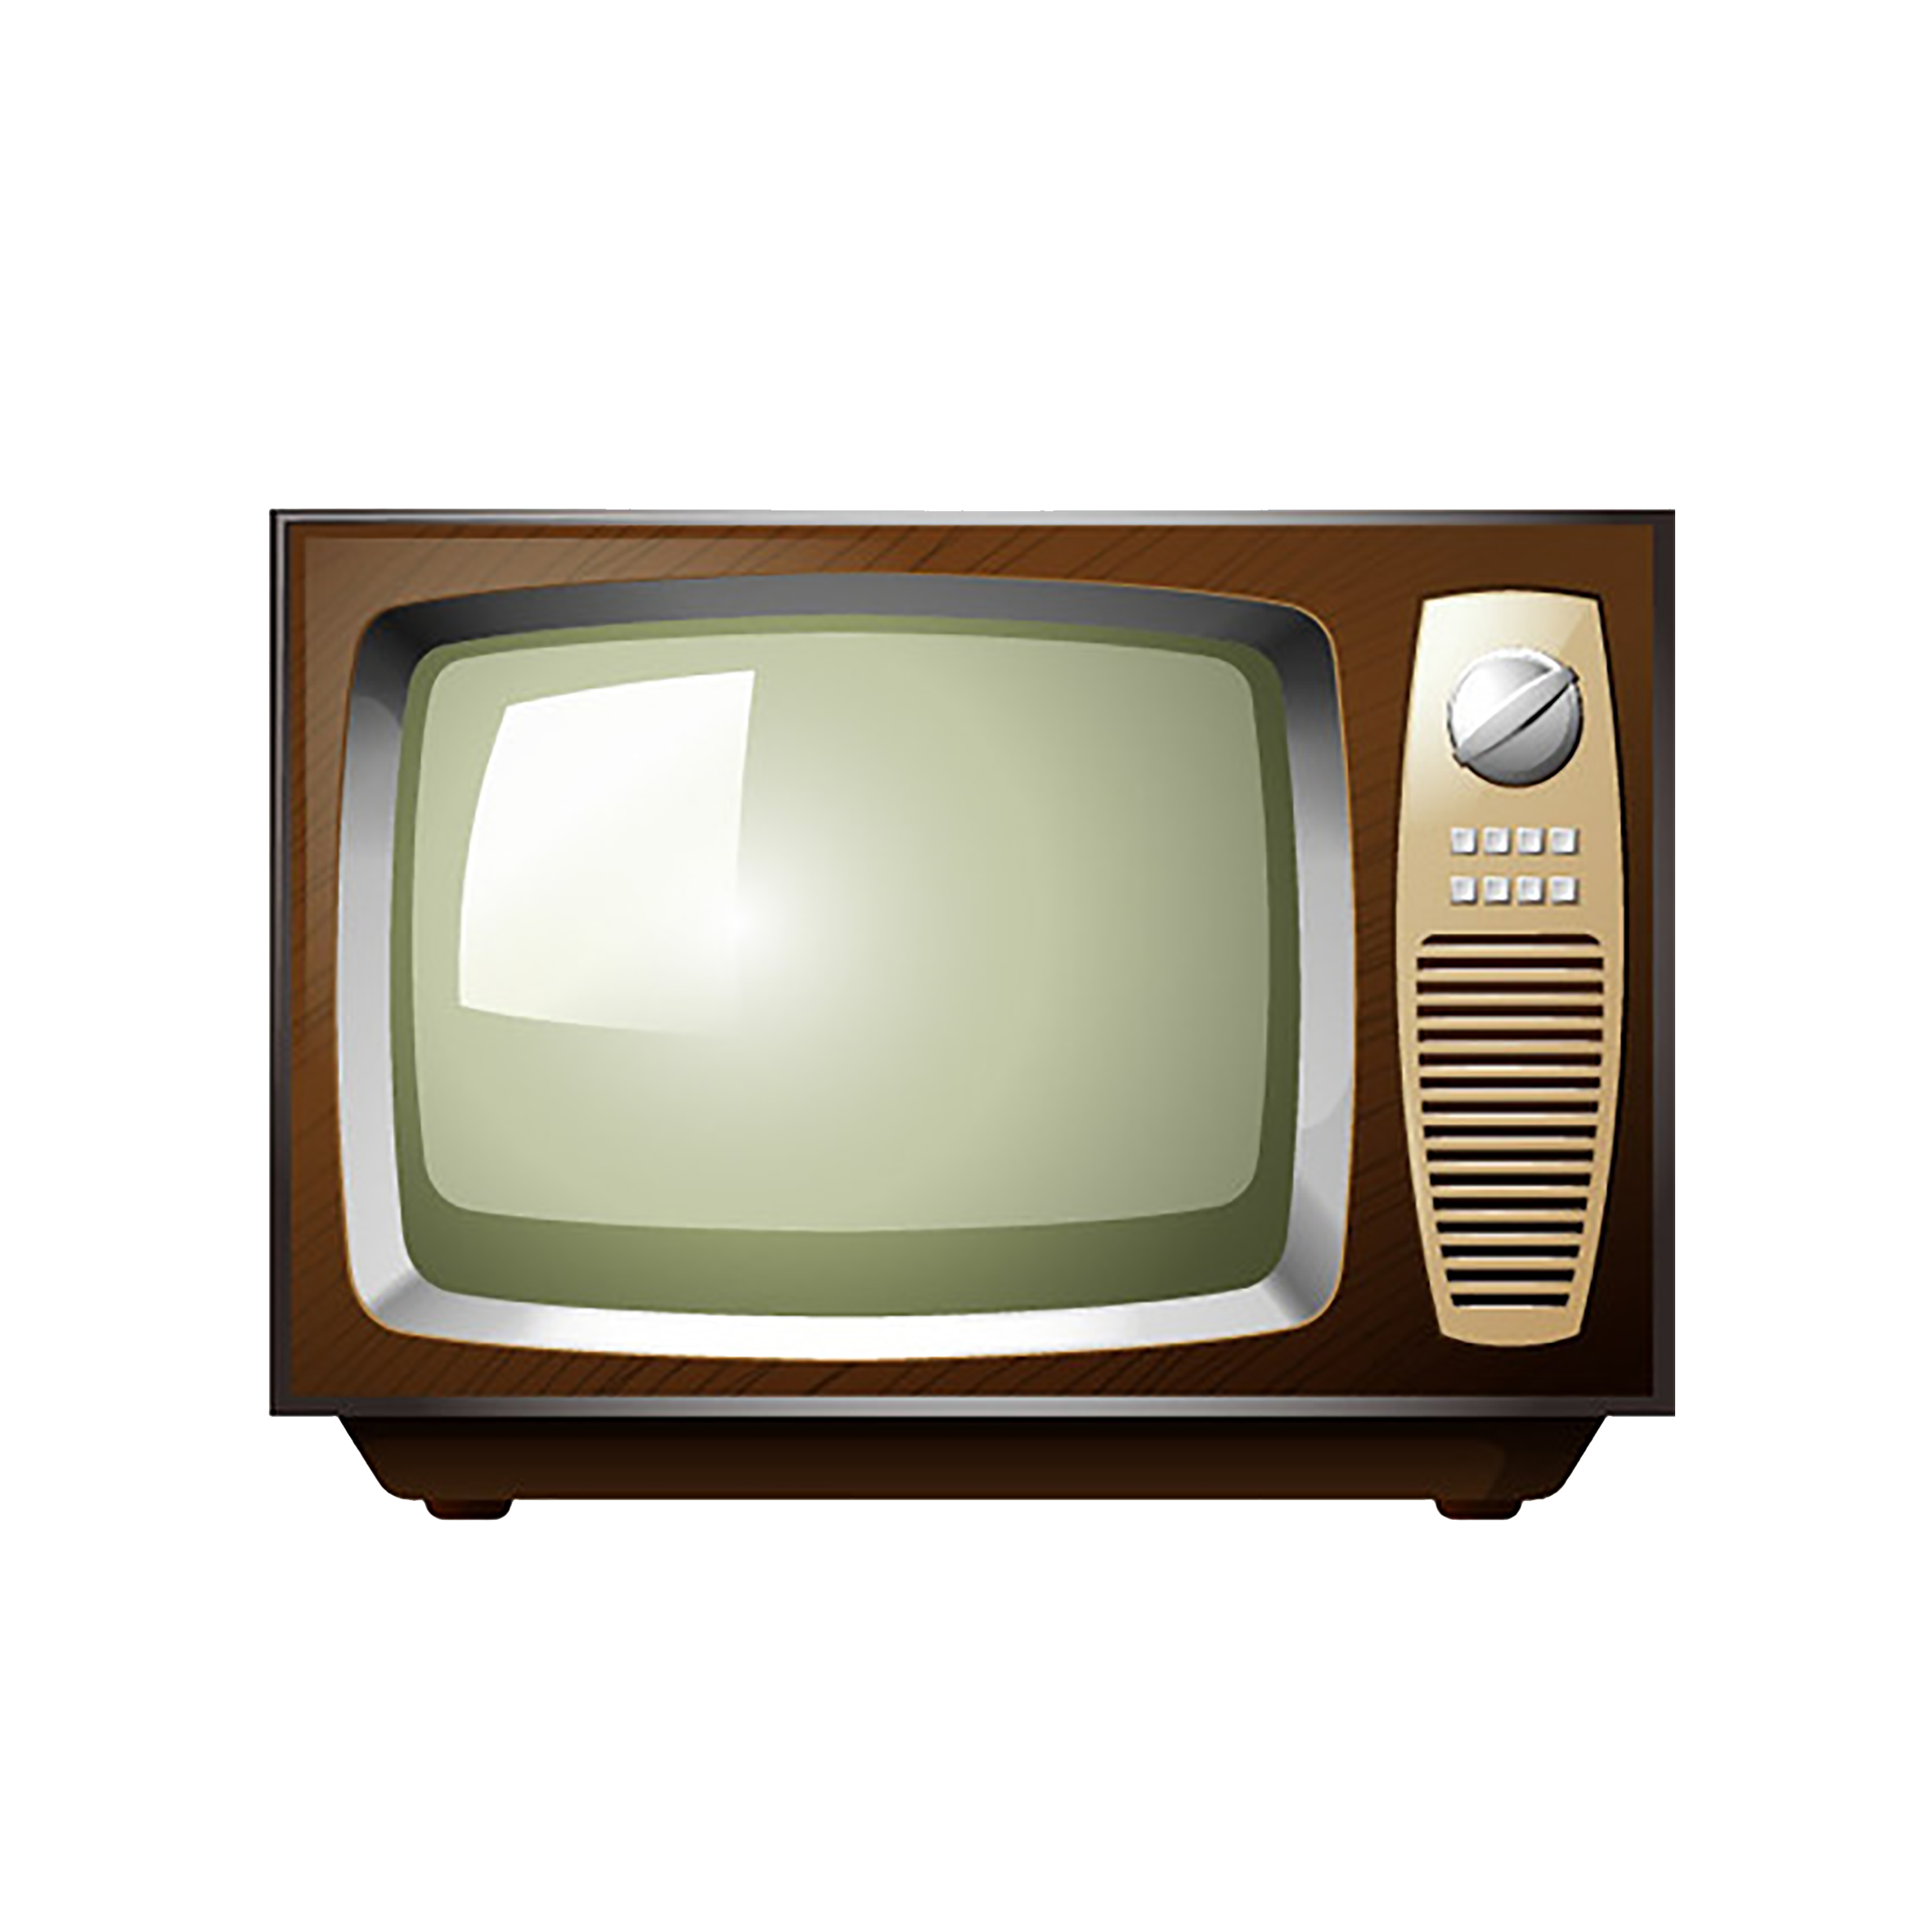 television clipart stock photo